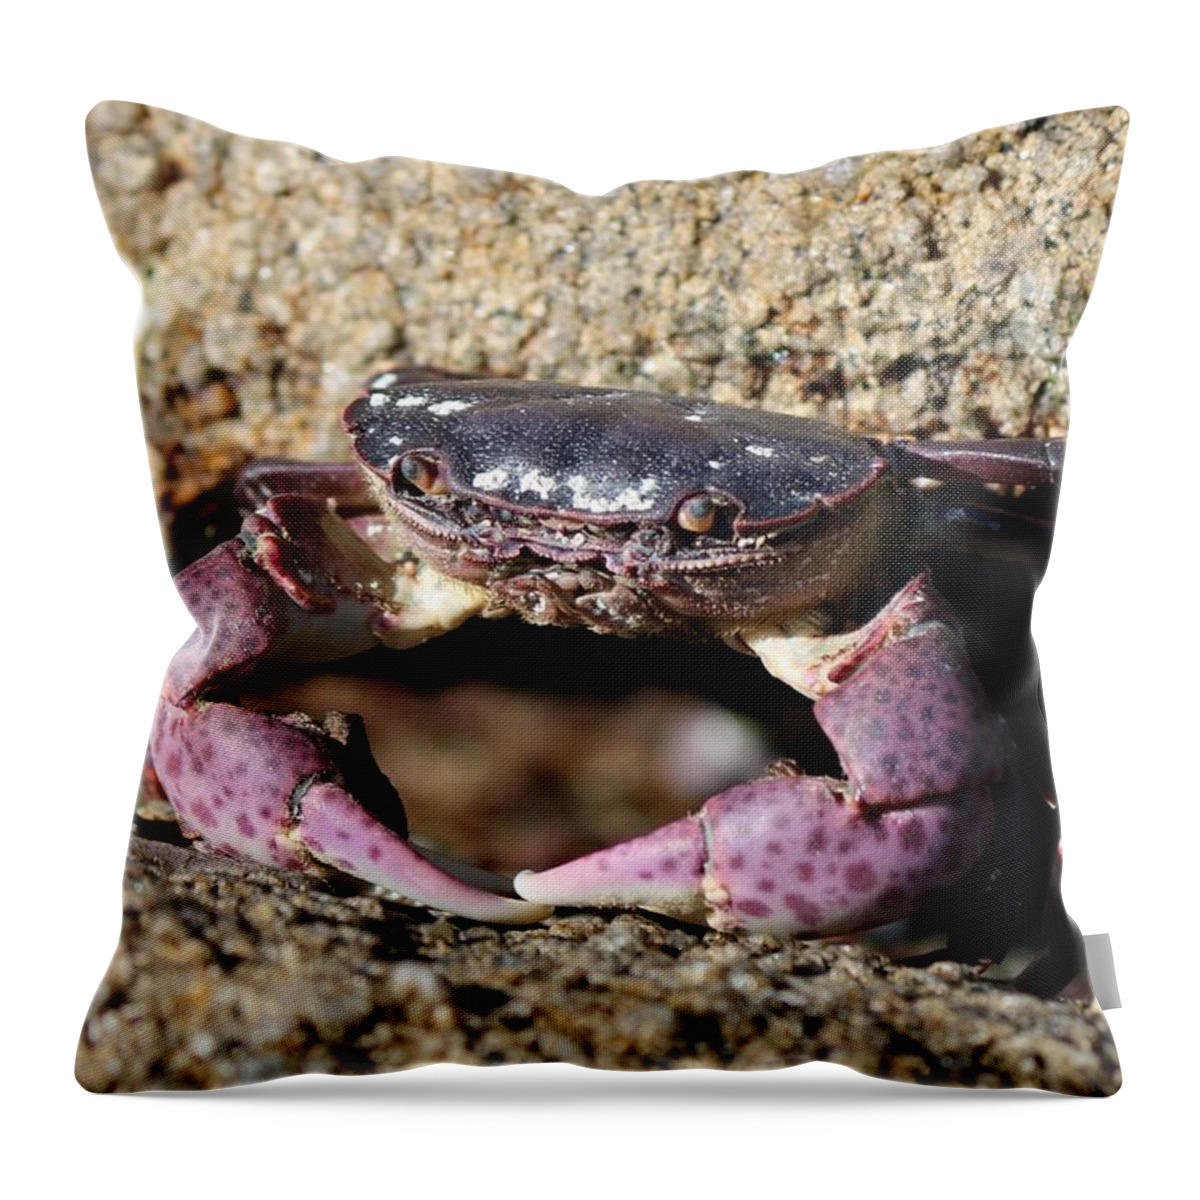 Crab Throw Pillow featuring the photograph Crab 2 by Christy Pooschke